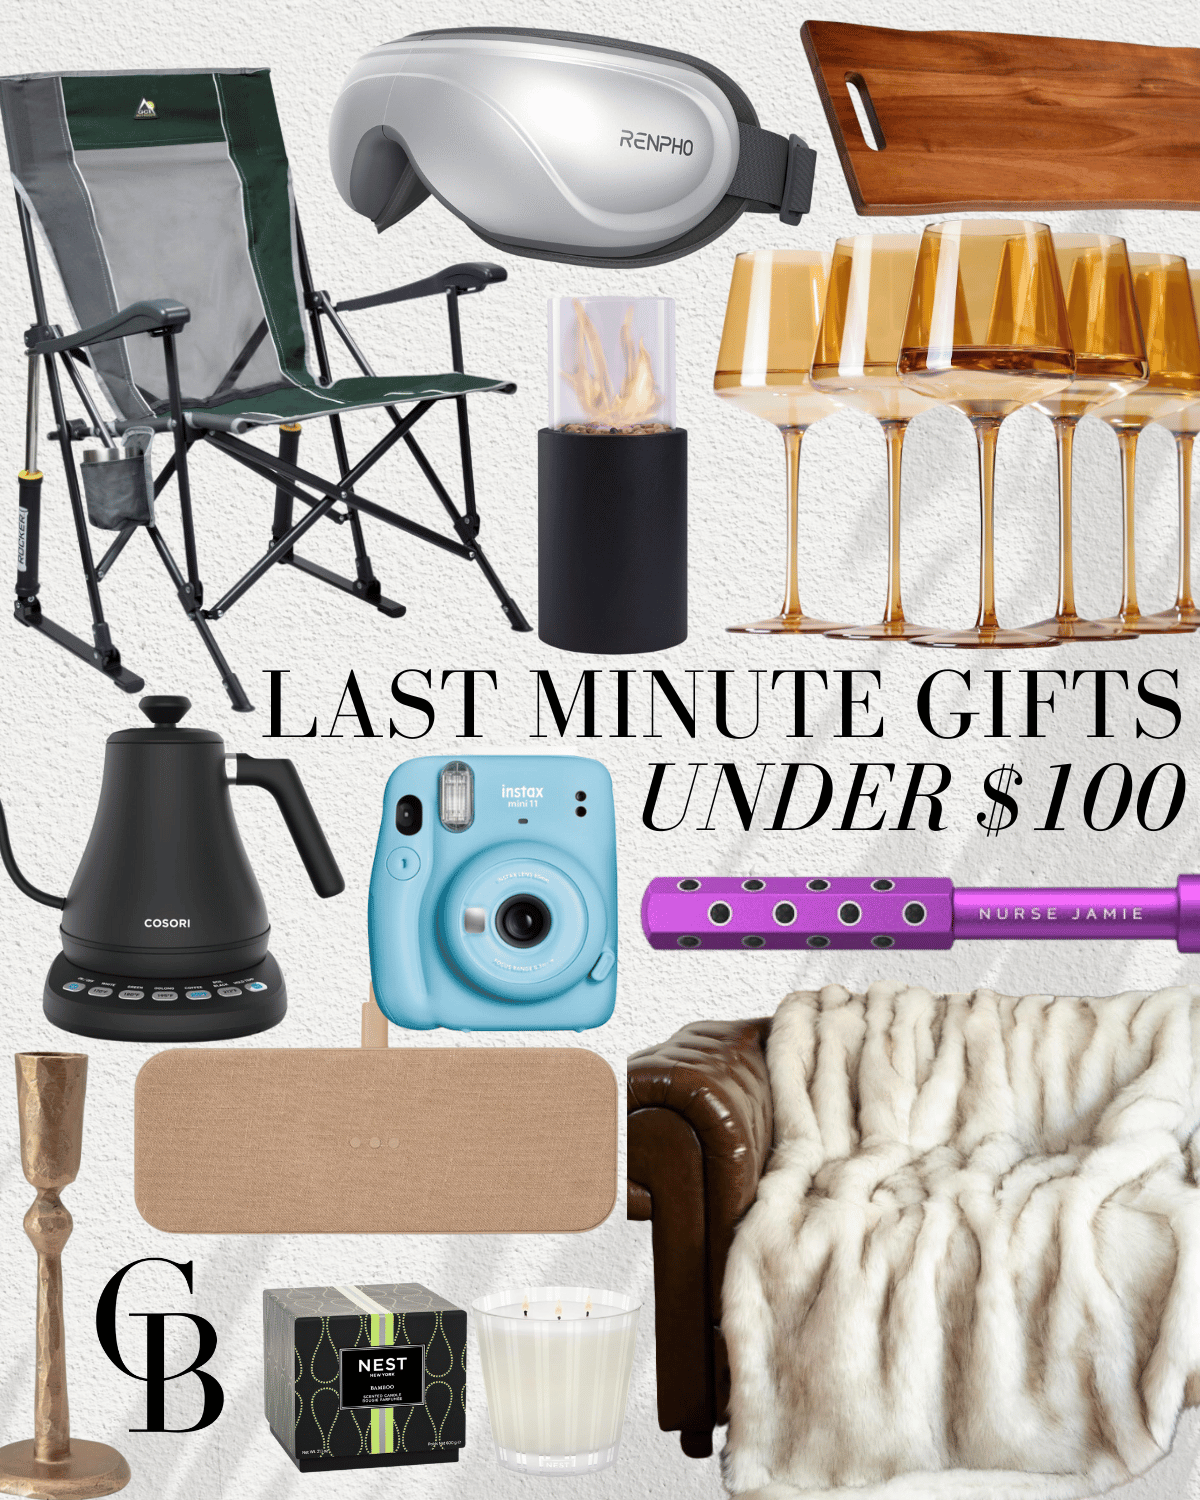 last minute gift ideas | #last #minute #gifts #giftideas #giftsunder100 #under100 #giftideasunder100 #rockingchair #camping #blanket #polaroid #kettle #wineglass #candle #eyemassager #cheeseboard